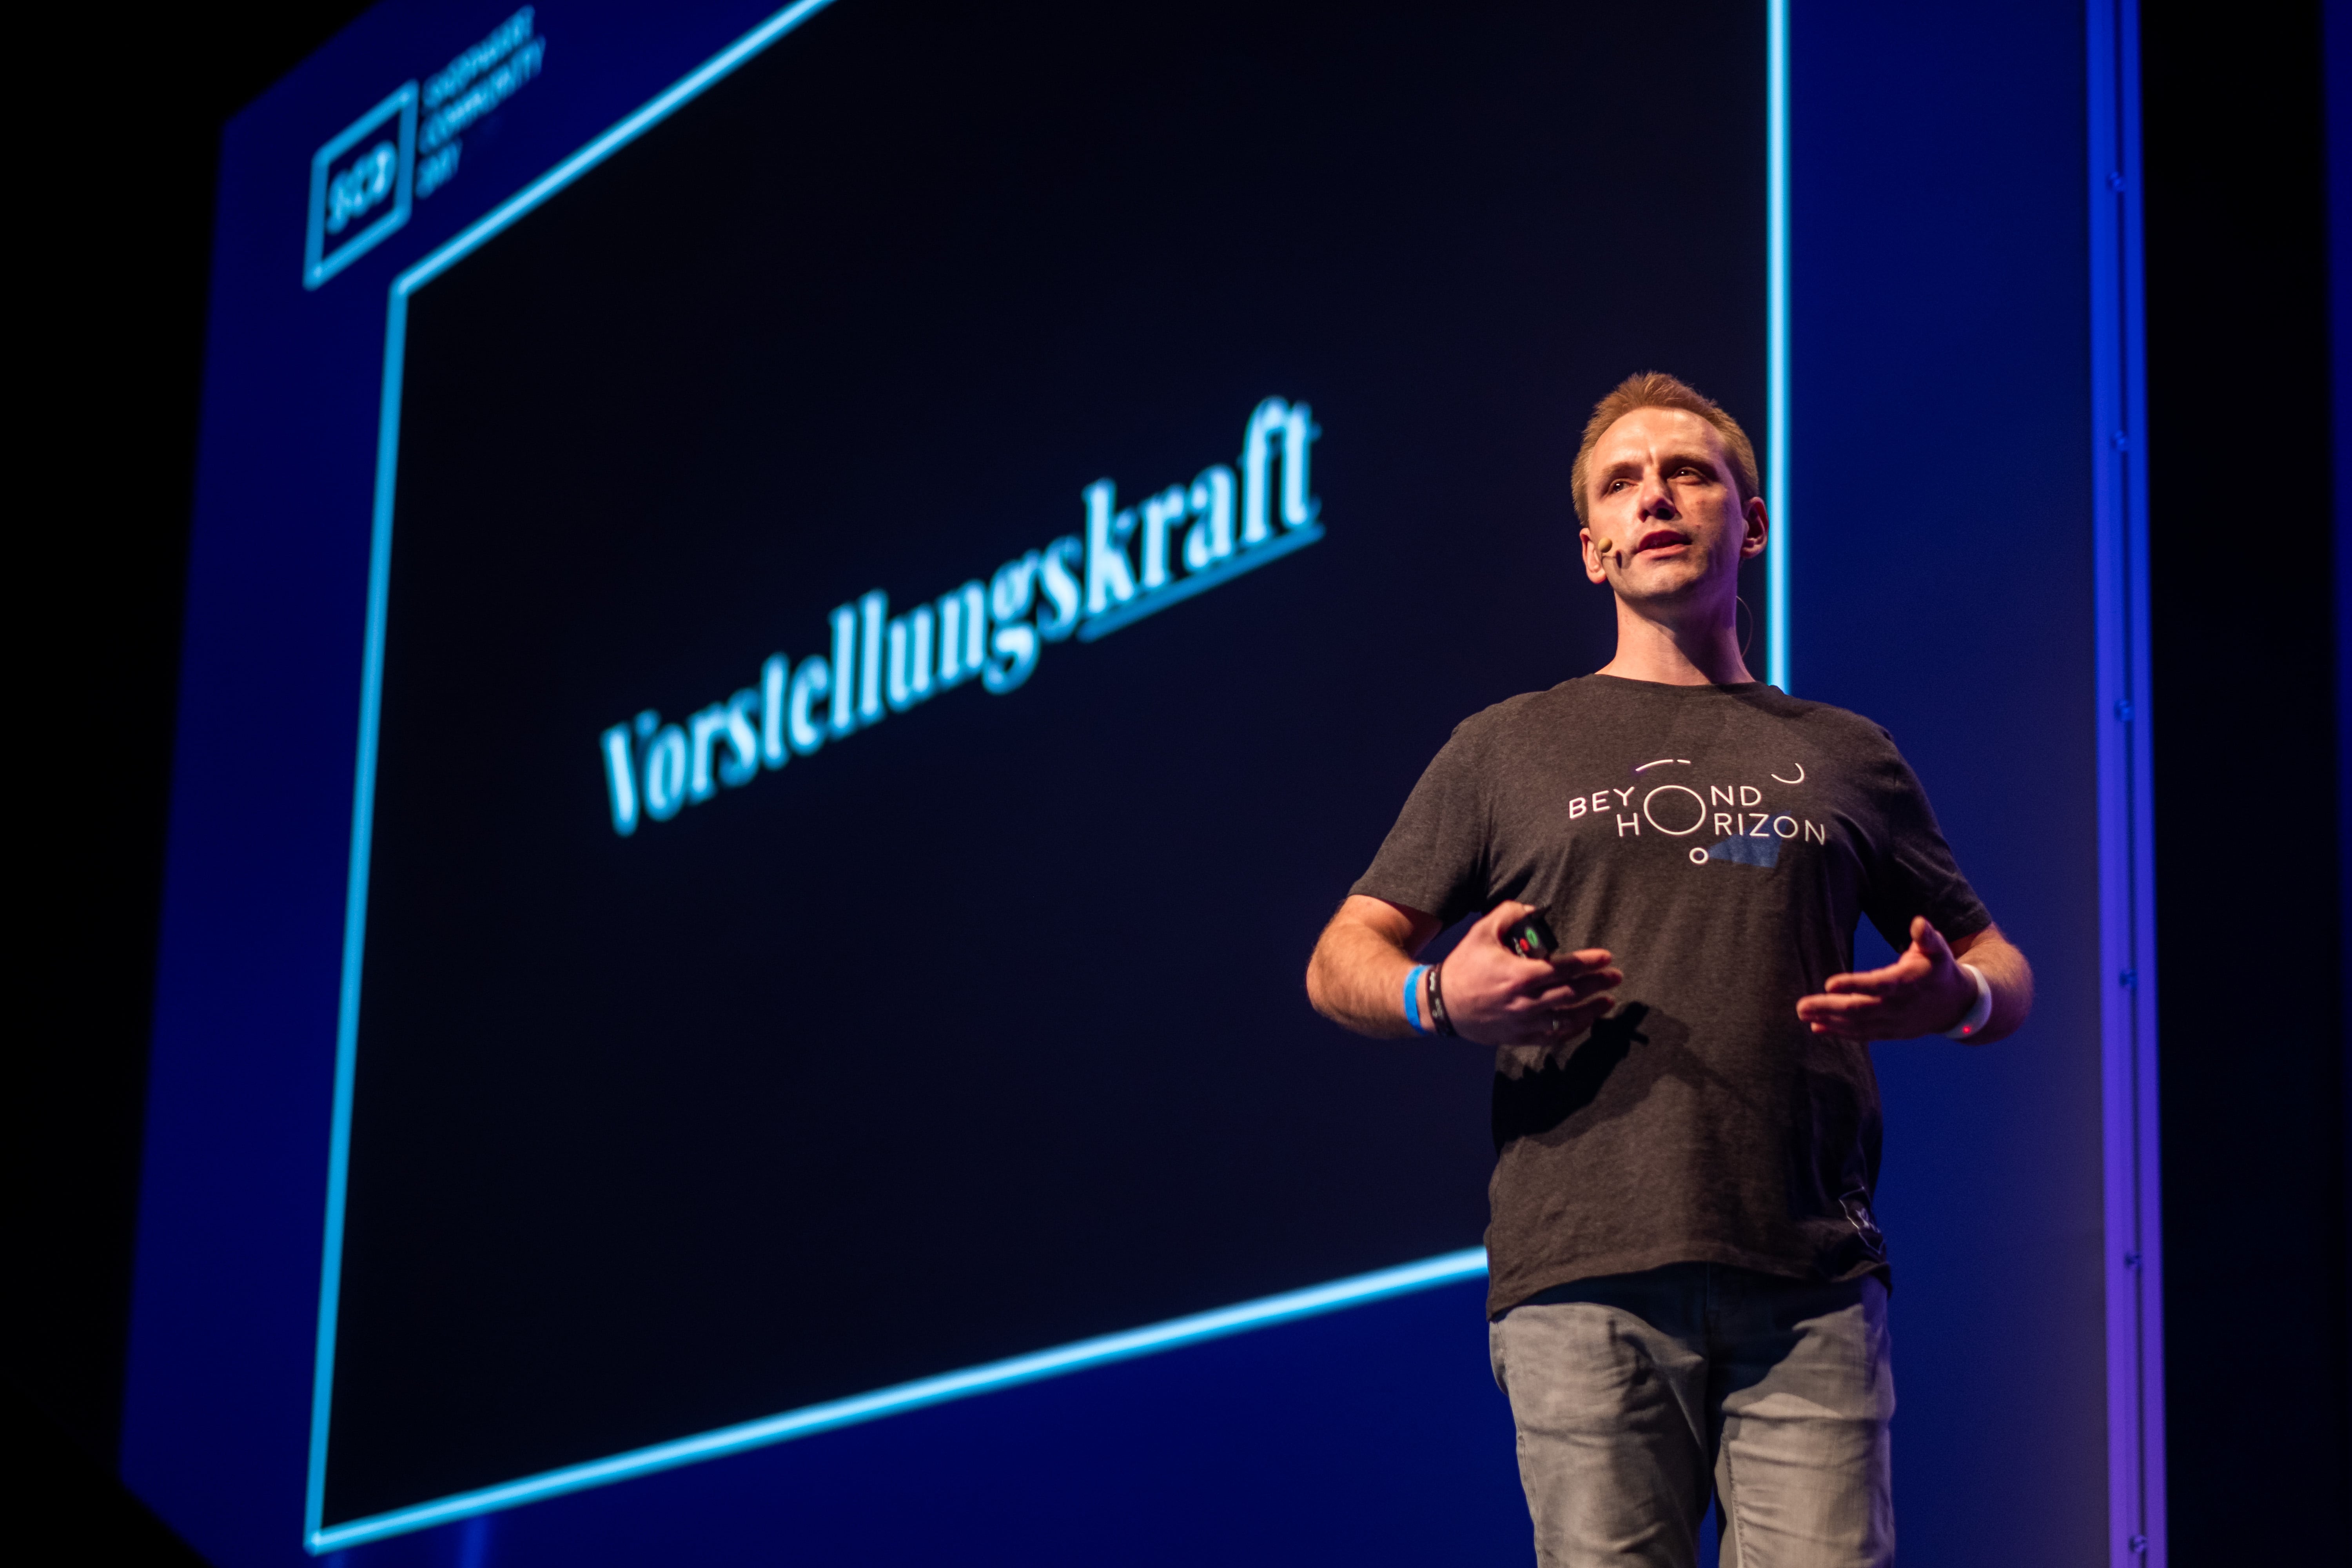 In-his-keynote-speech-Stefan-Hamann-presents-the-latest-news-and-visionary-ideas-emerging-from-the-Shopware-ecosystem